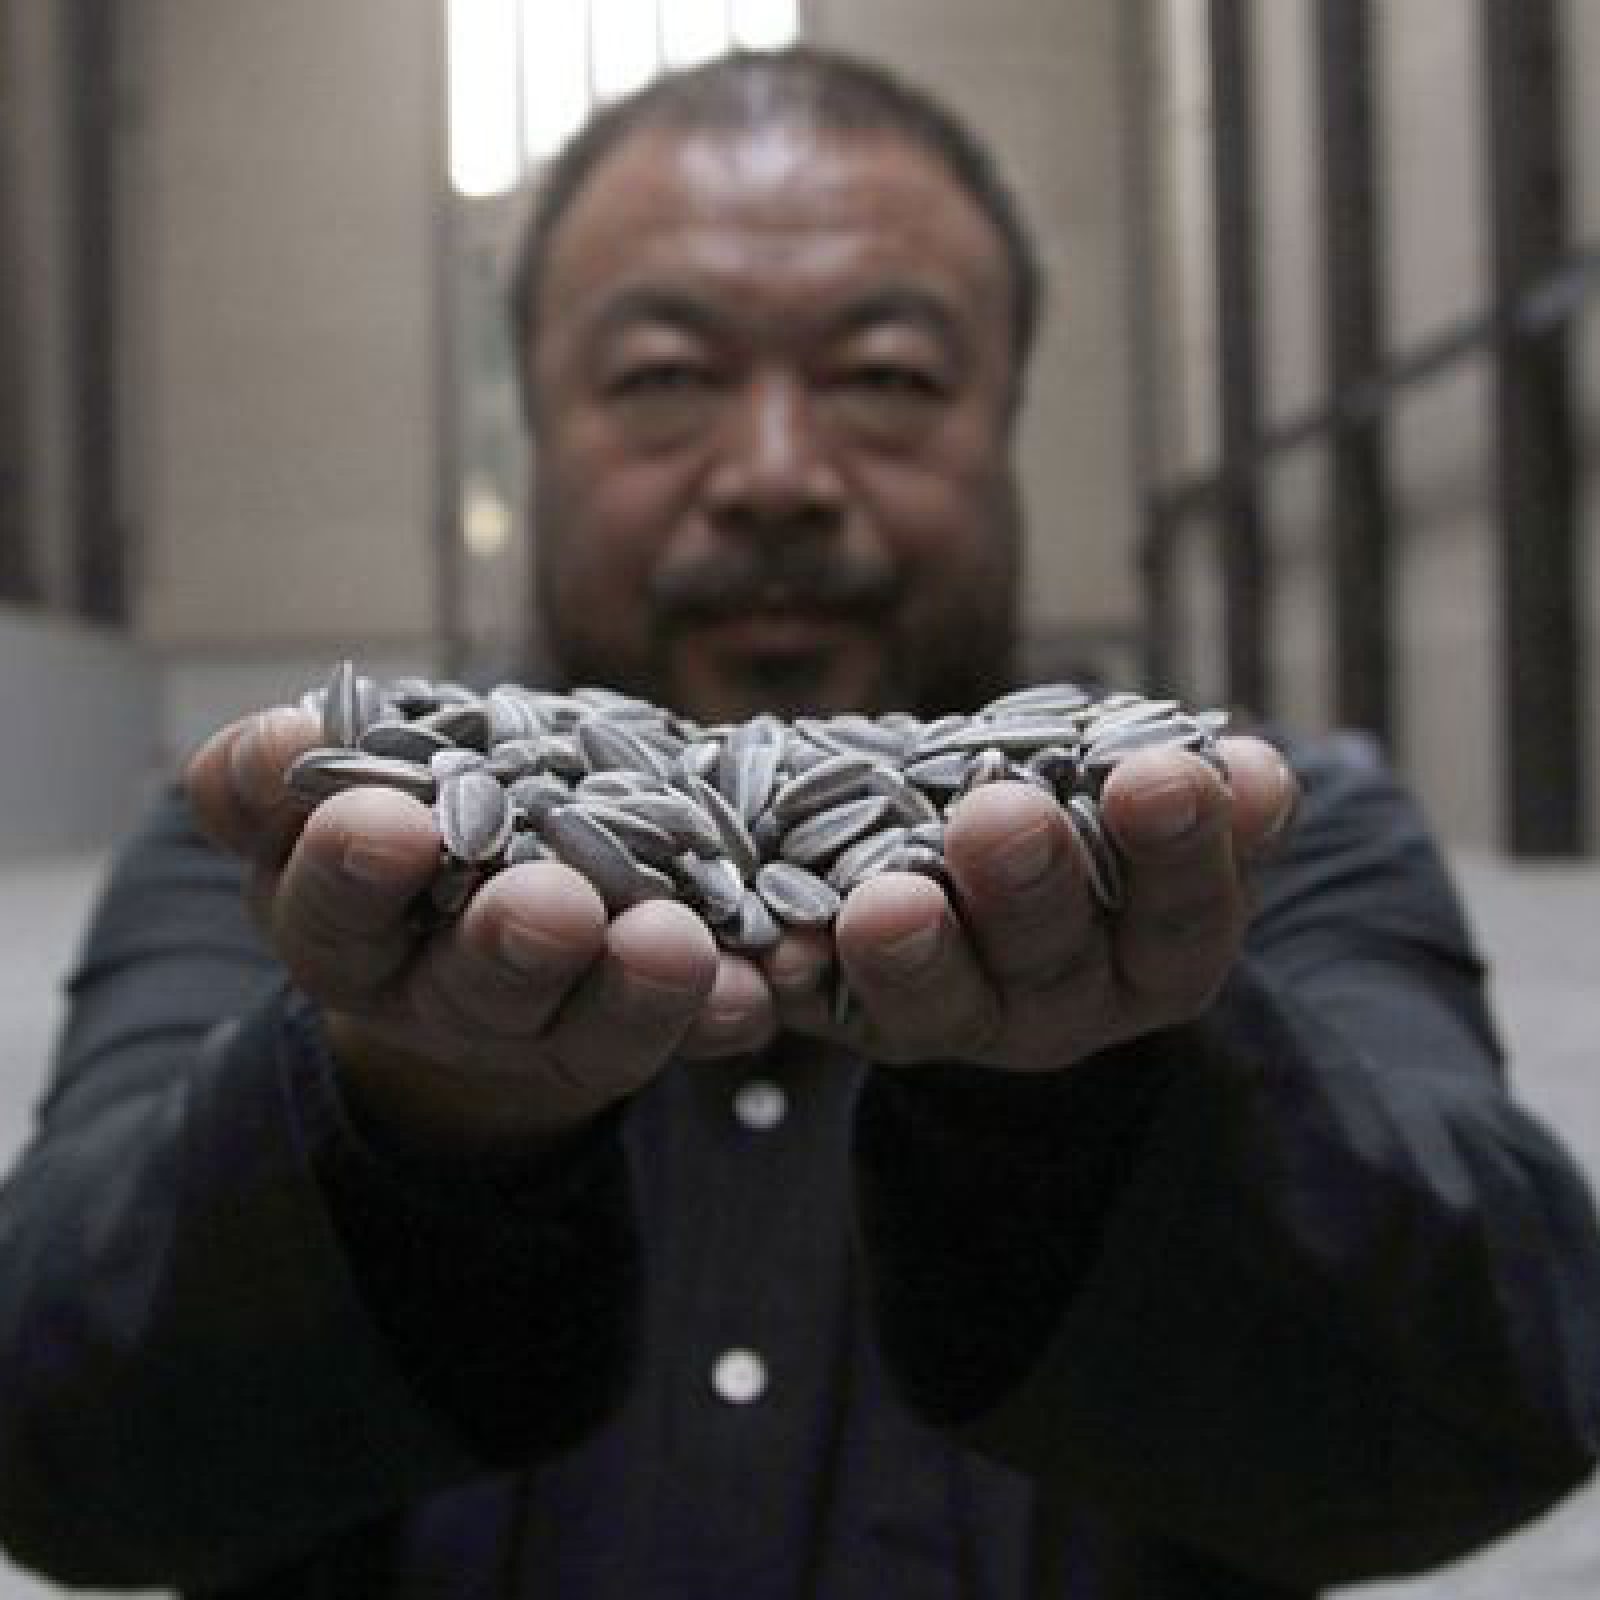 Chinese artist Ai Weiwei poses for a photograph with his new installation entitled 'Sunflower Seeds', at its unveiling in the Turbine Hall at the Tate Modern gallery, in London October 11, 2010. REUTERS/Stefan Wermuth (BRITAIN - Tags: ENTERTAINMENT)